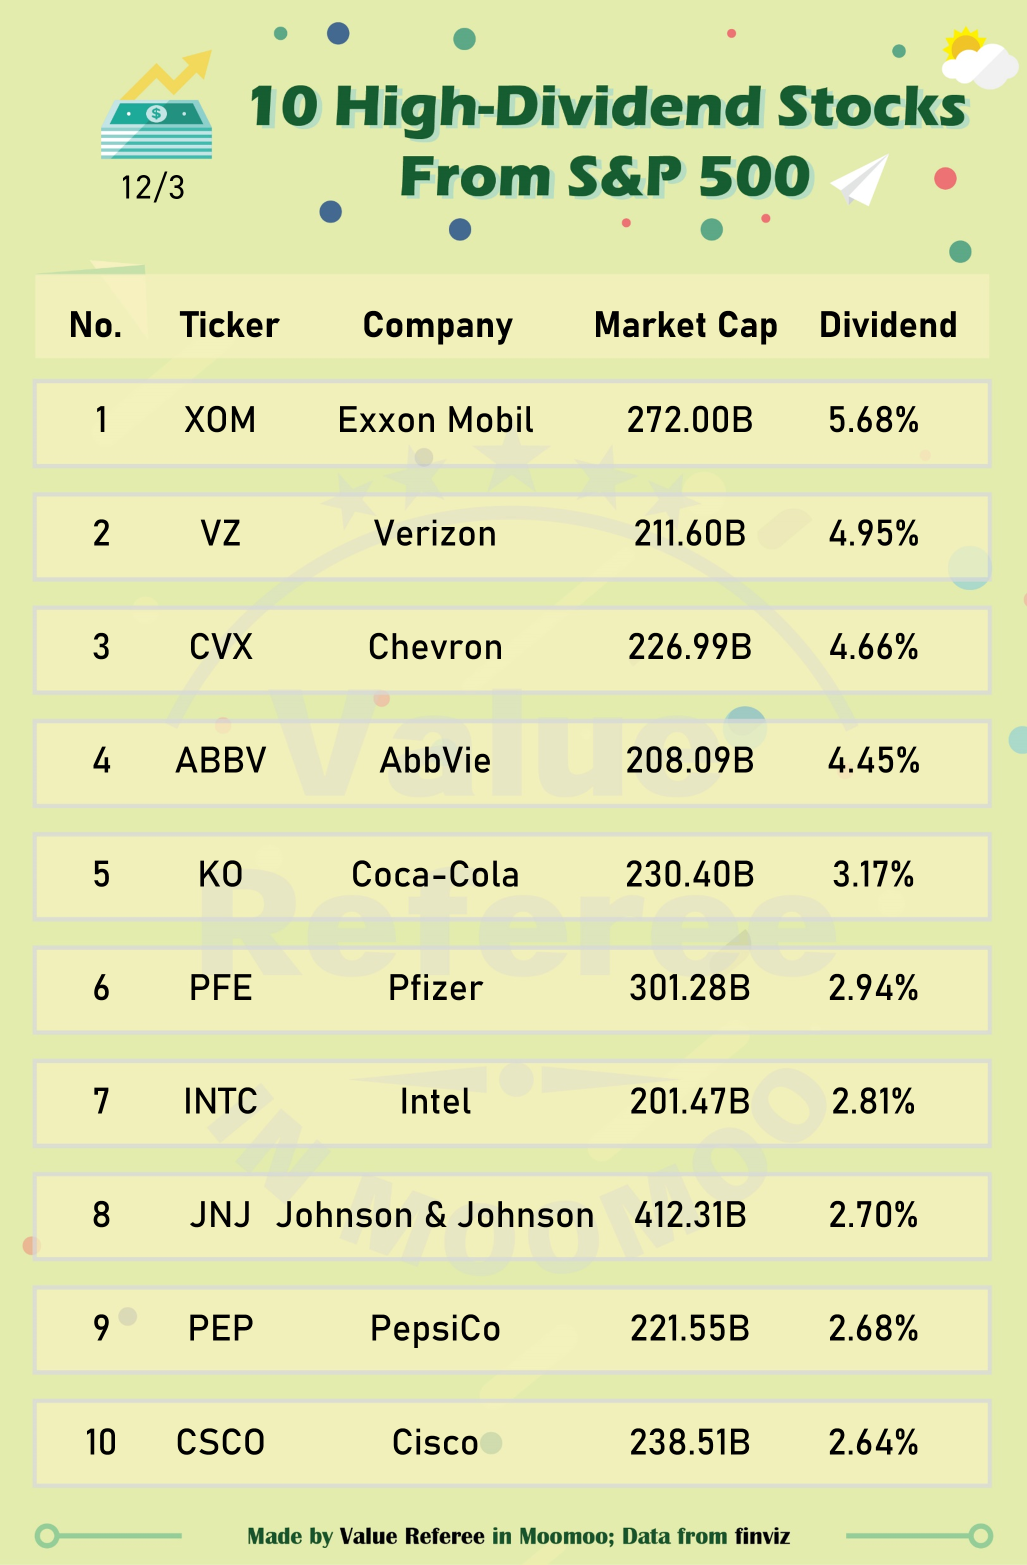 Which large-cap stocks have the highest dividends in S&P 500?